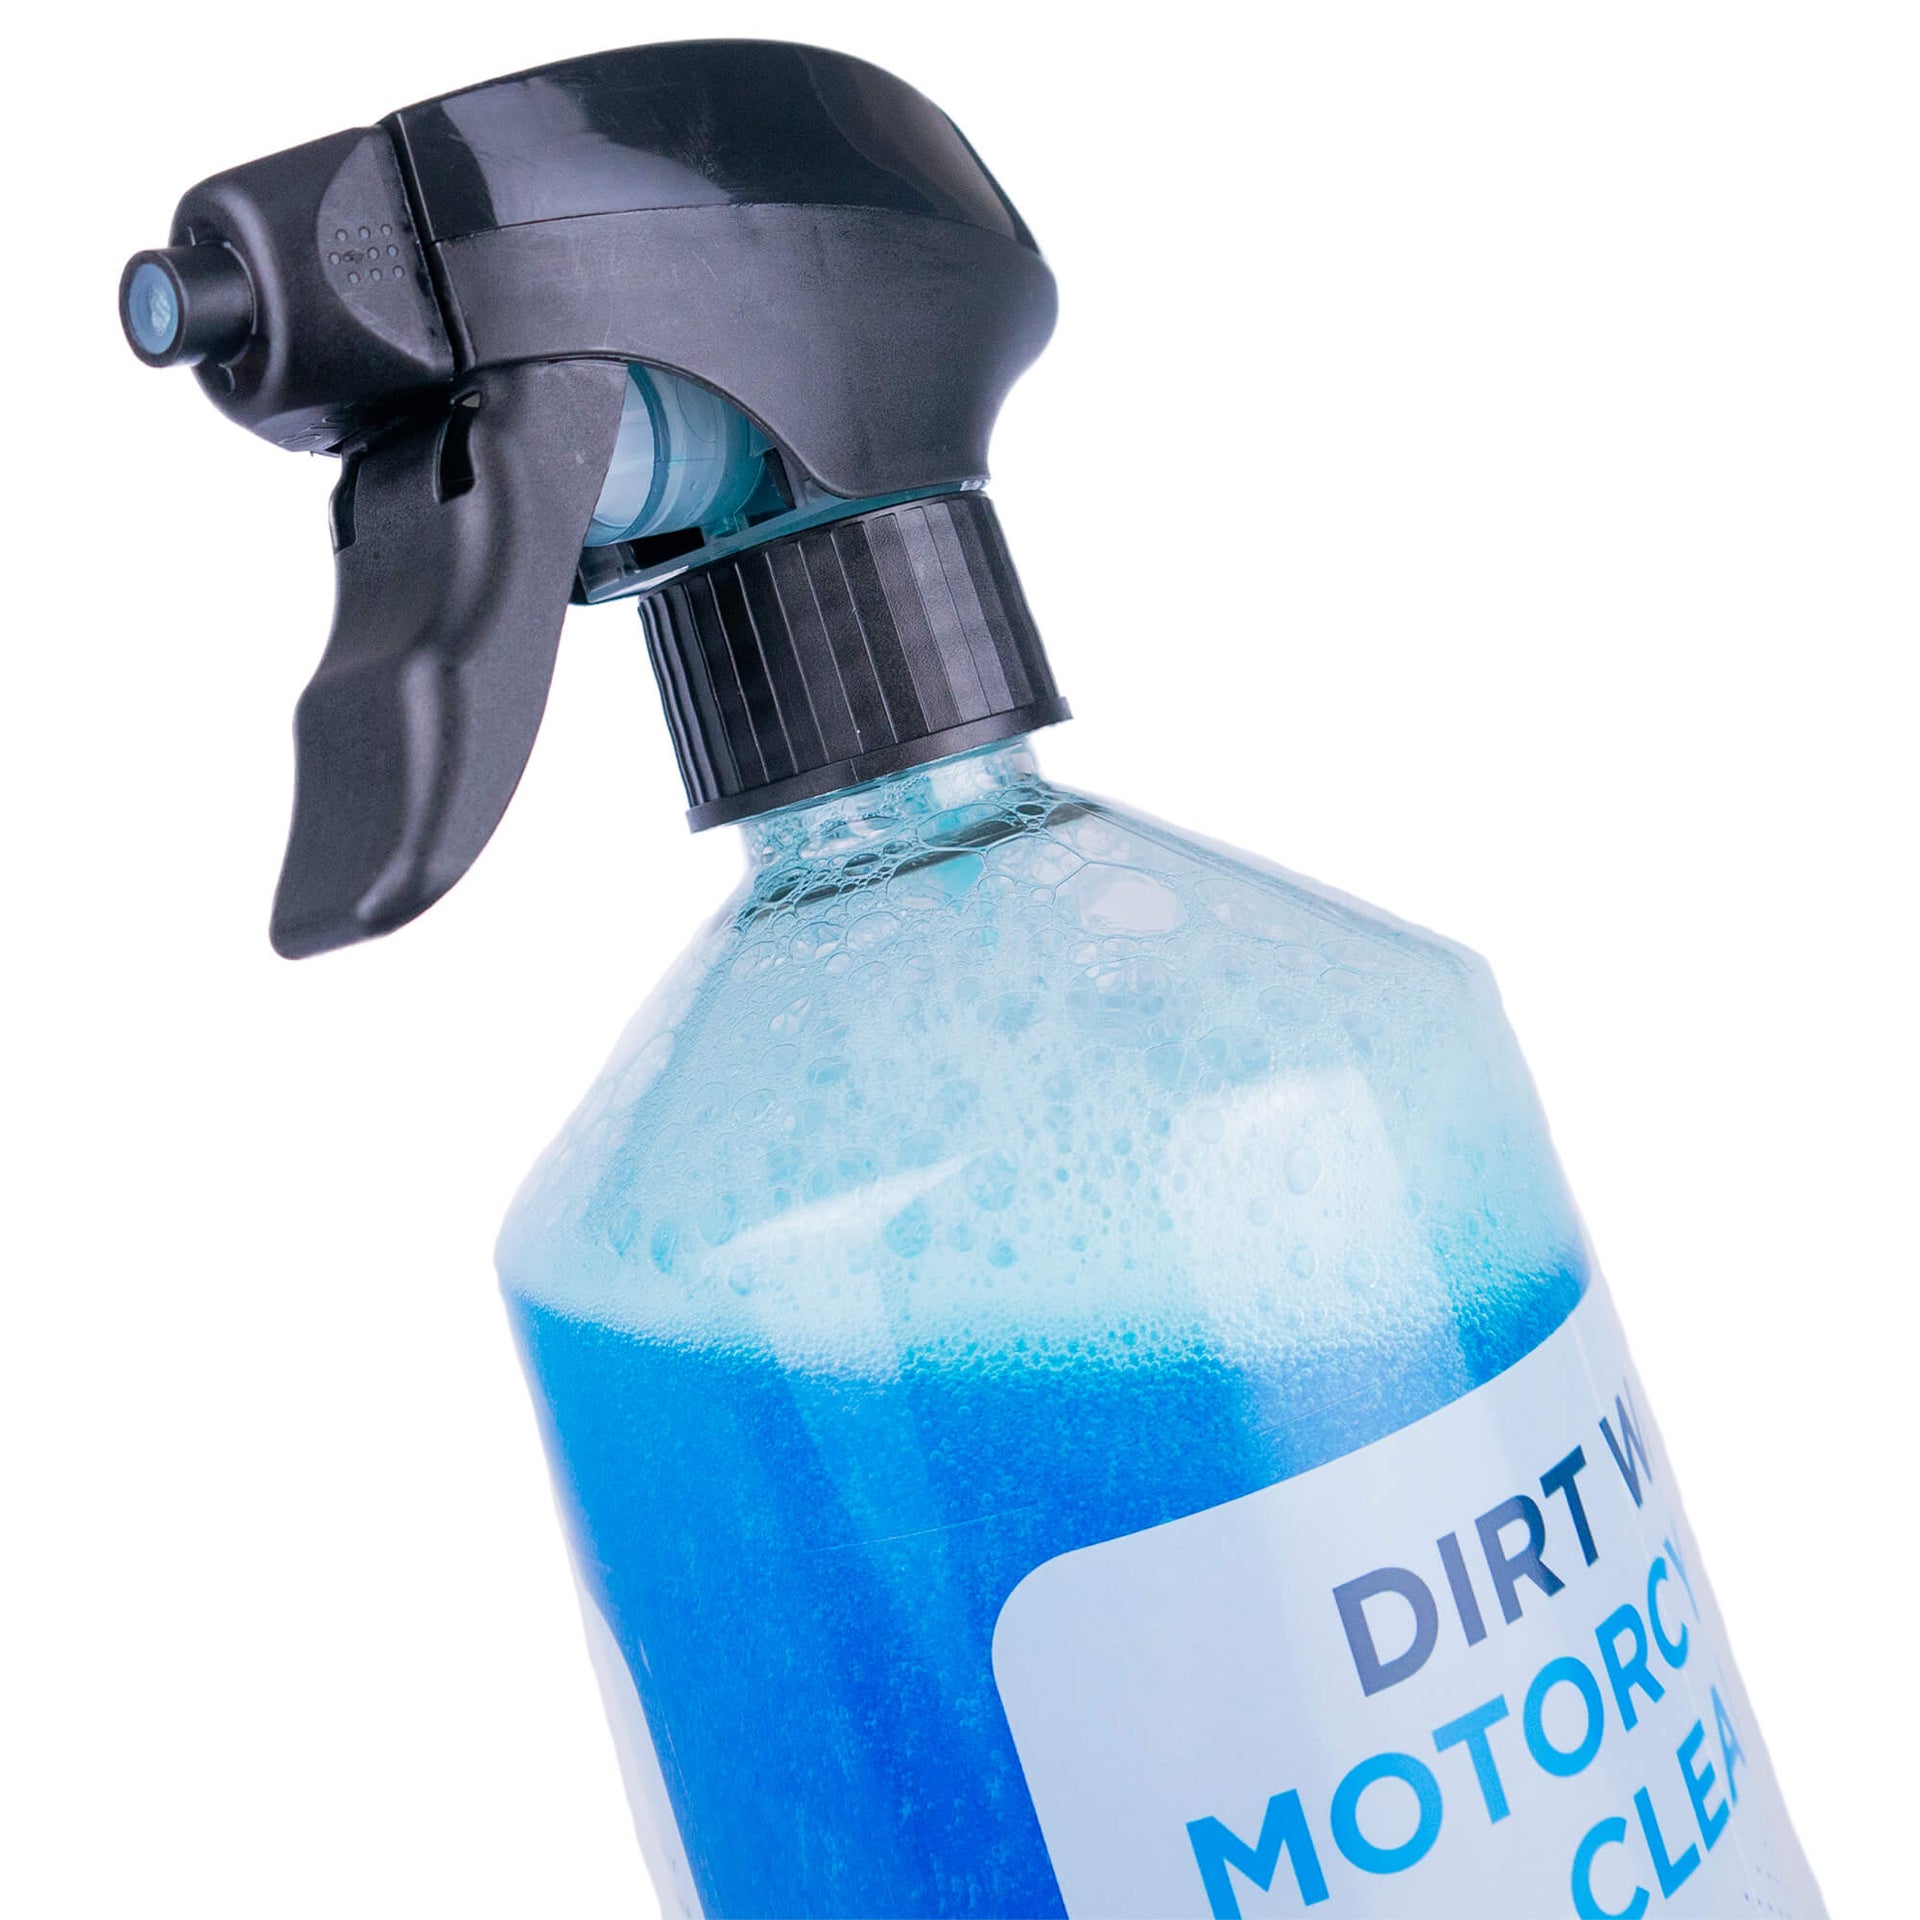 Dirt Wash Motorcycle Cleaner